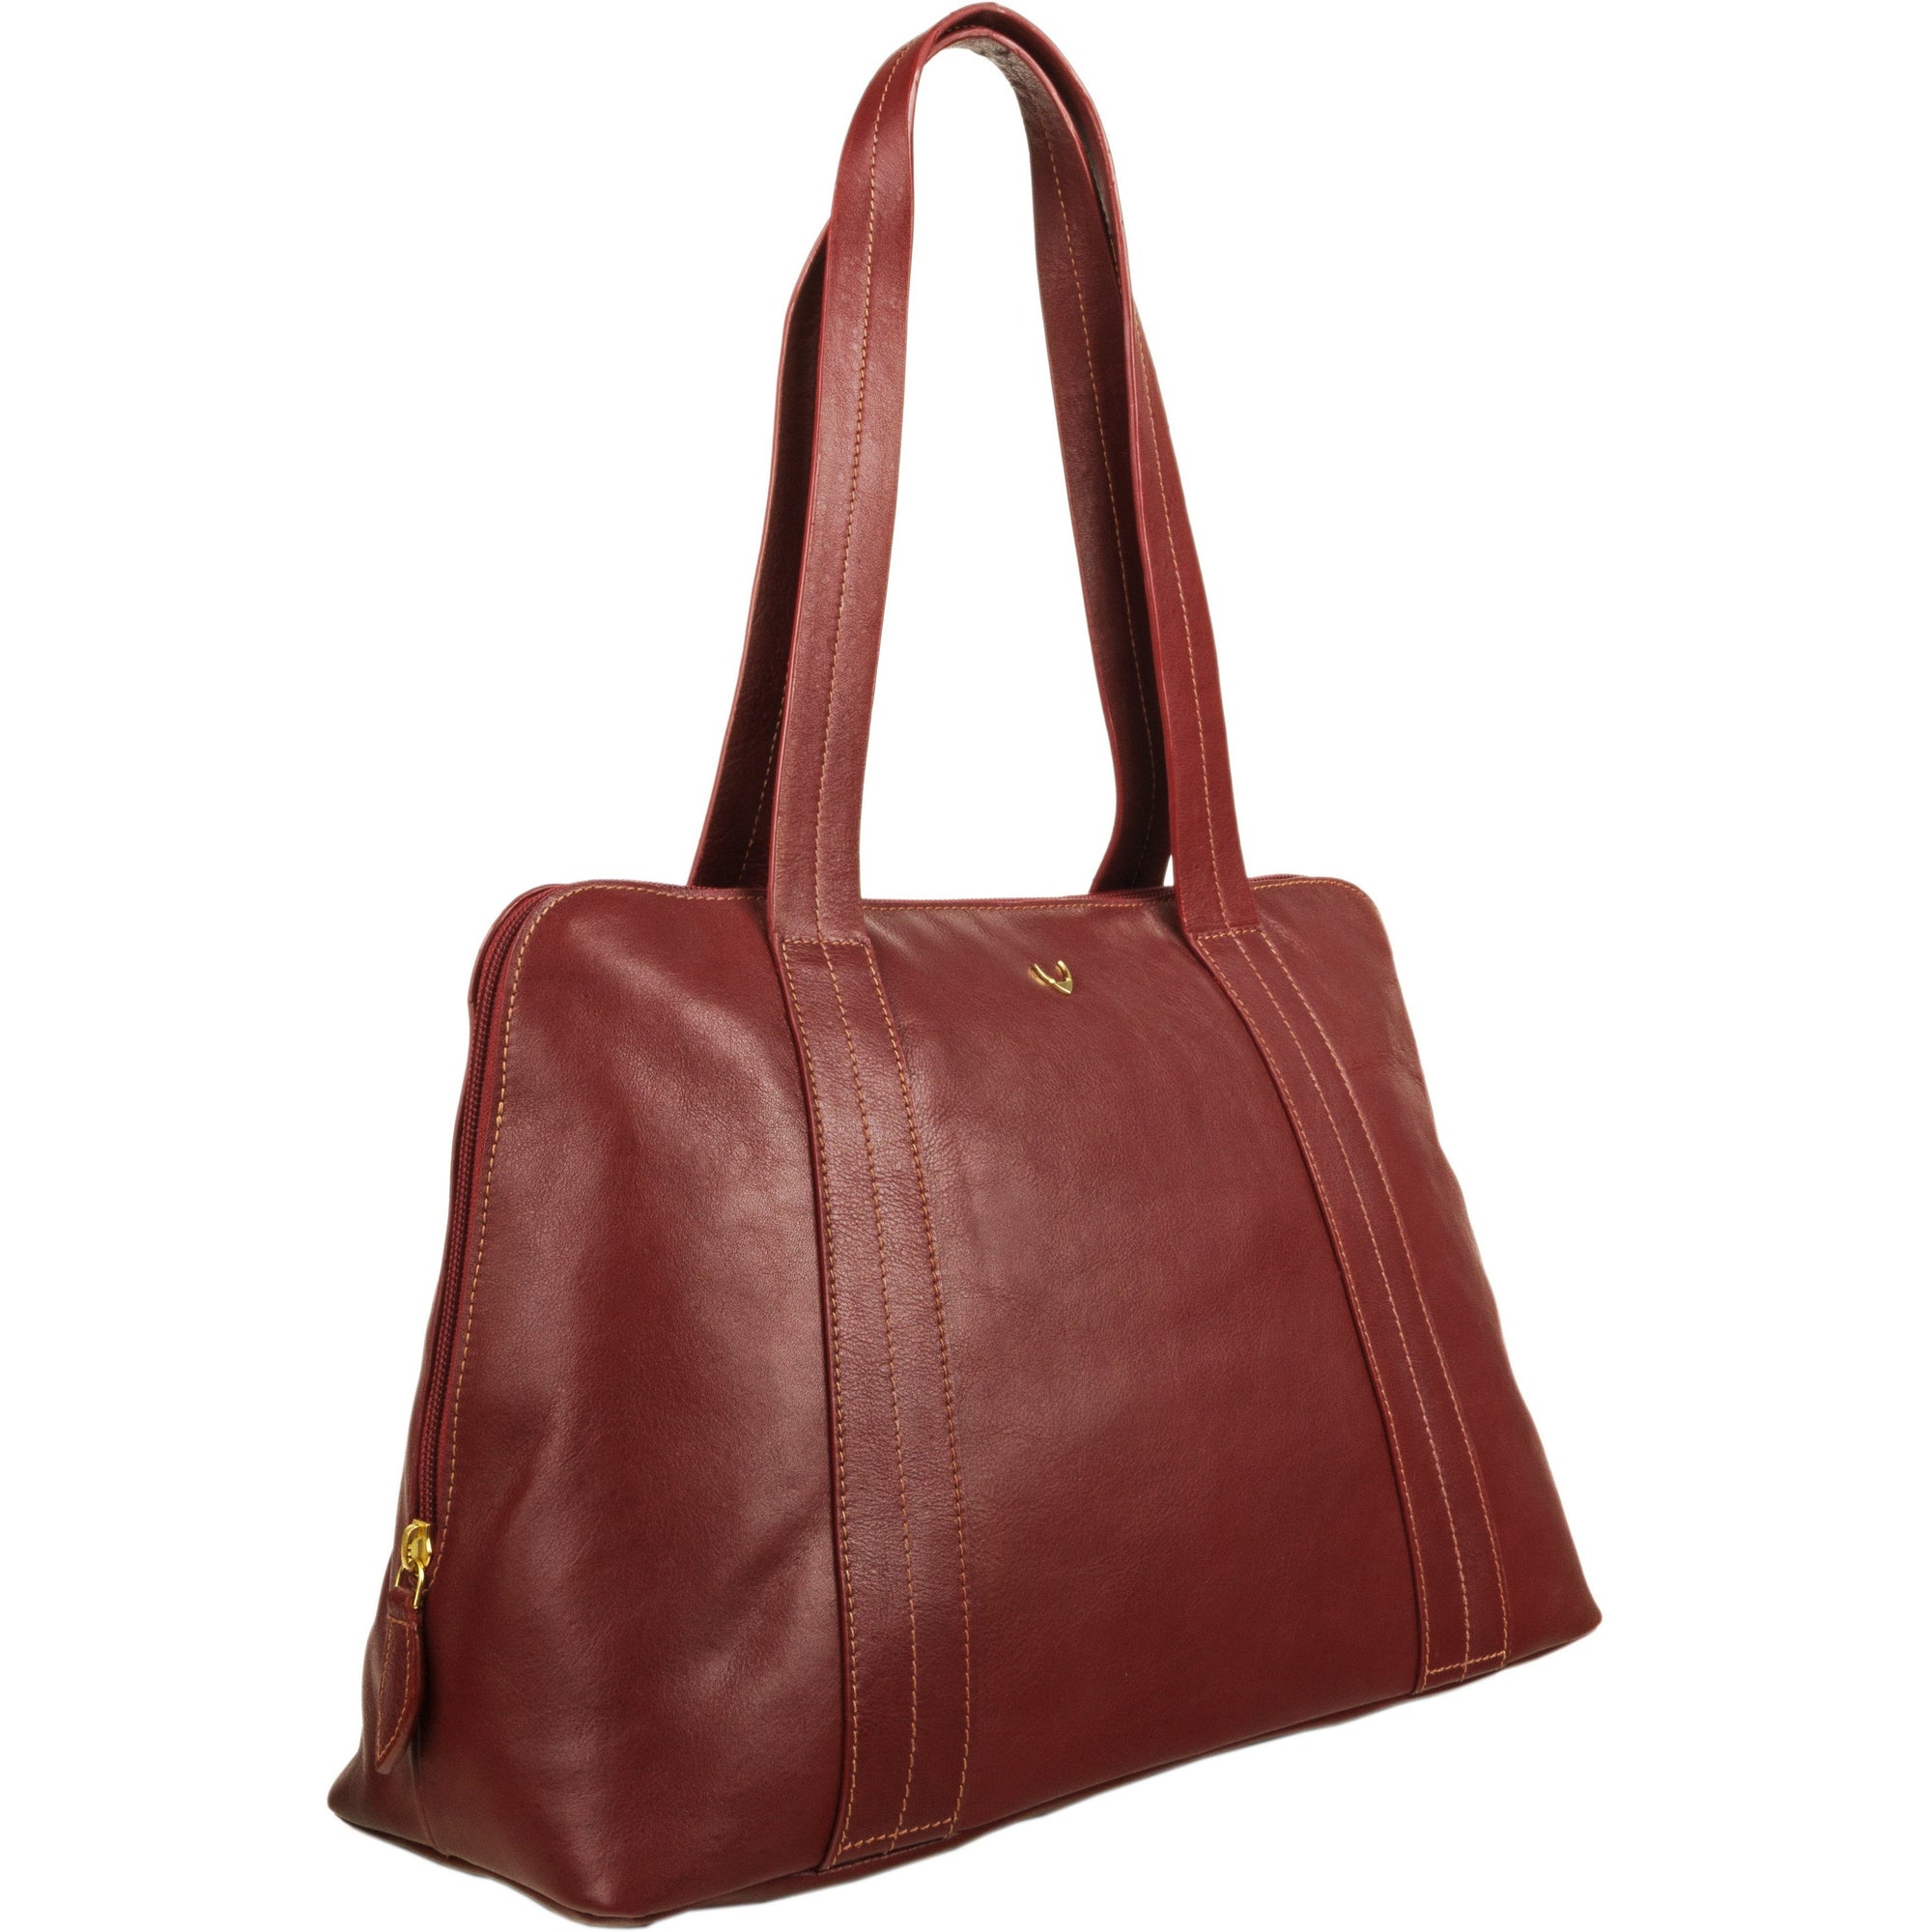 Cery Leather Multi-Compartment Tote - Burgundy